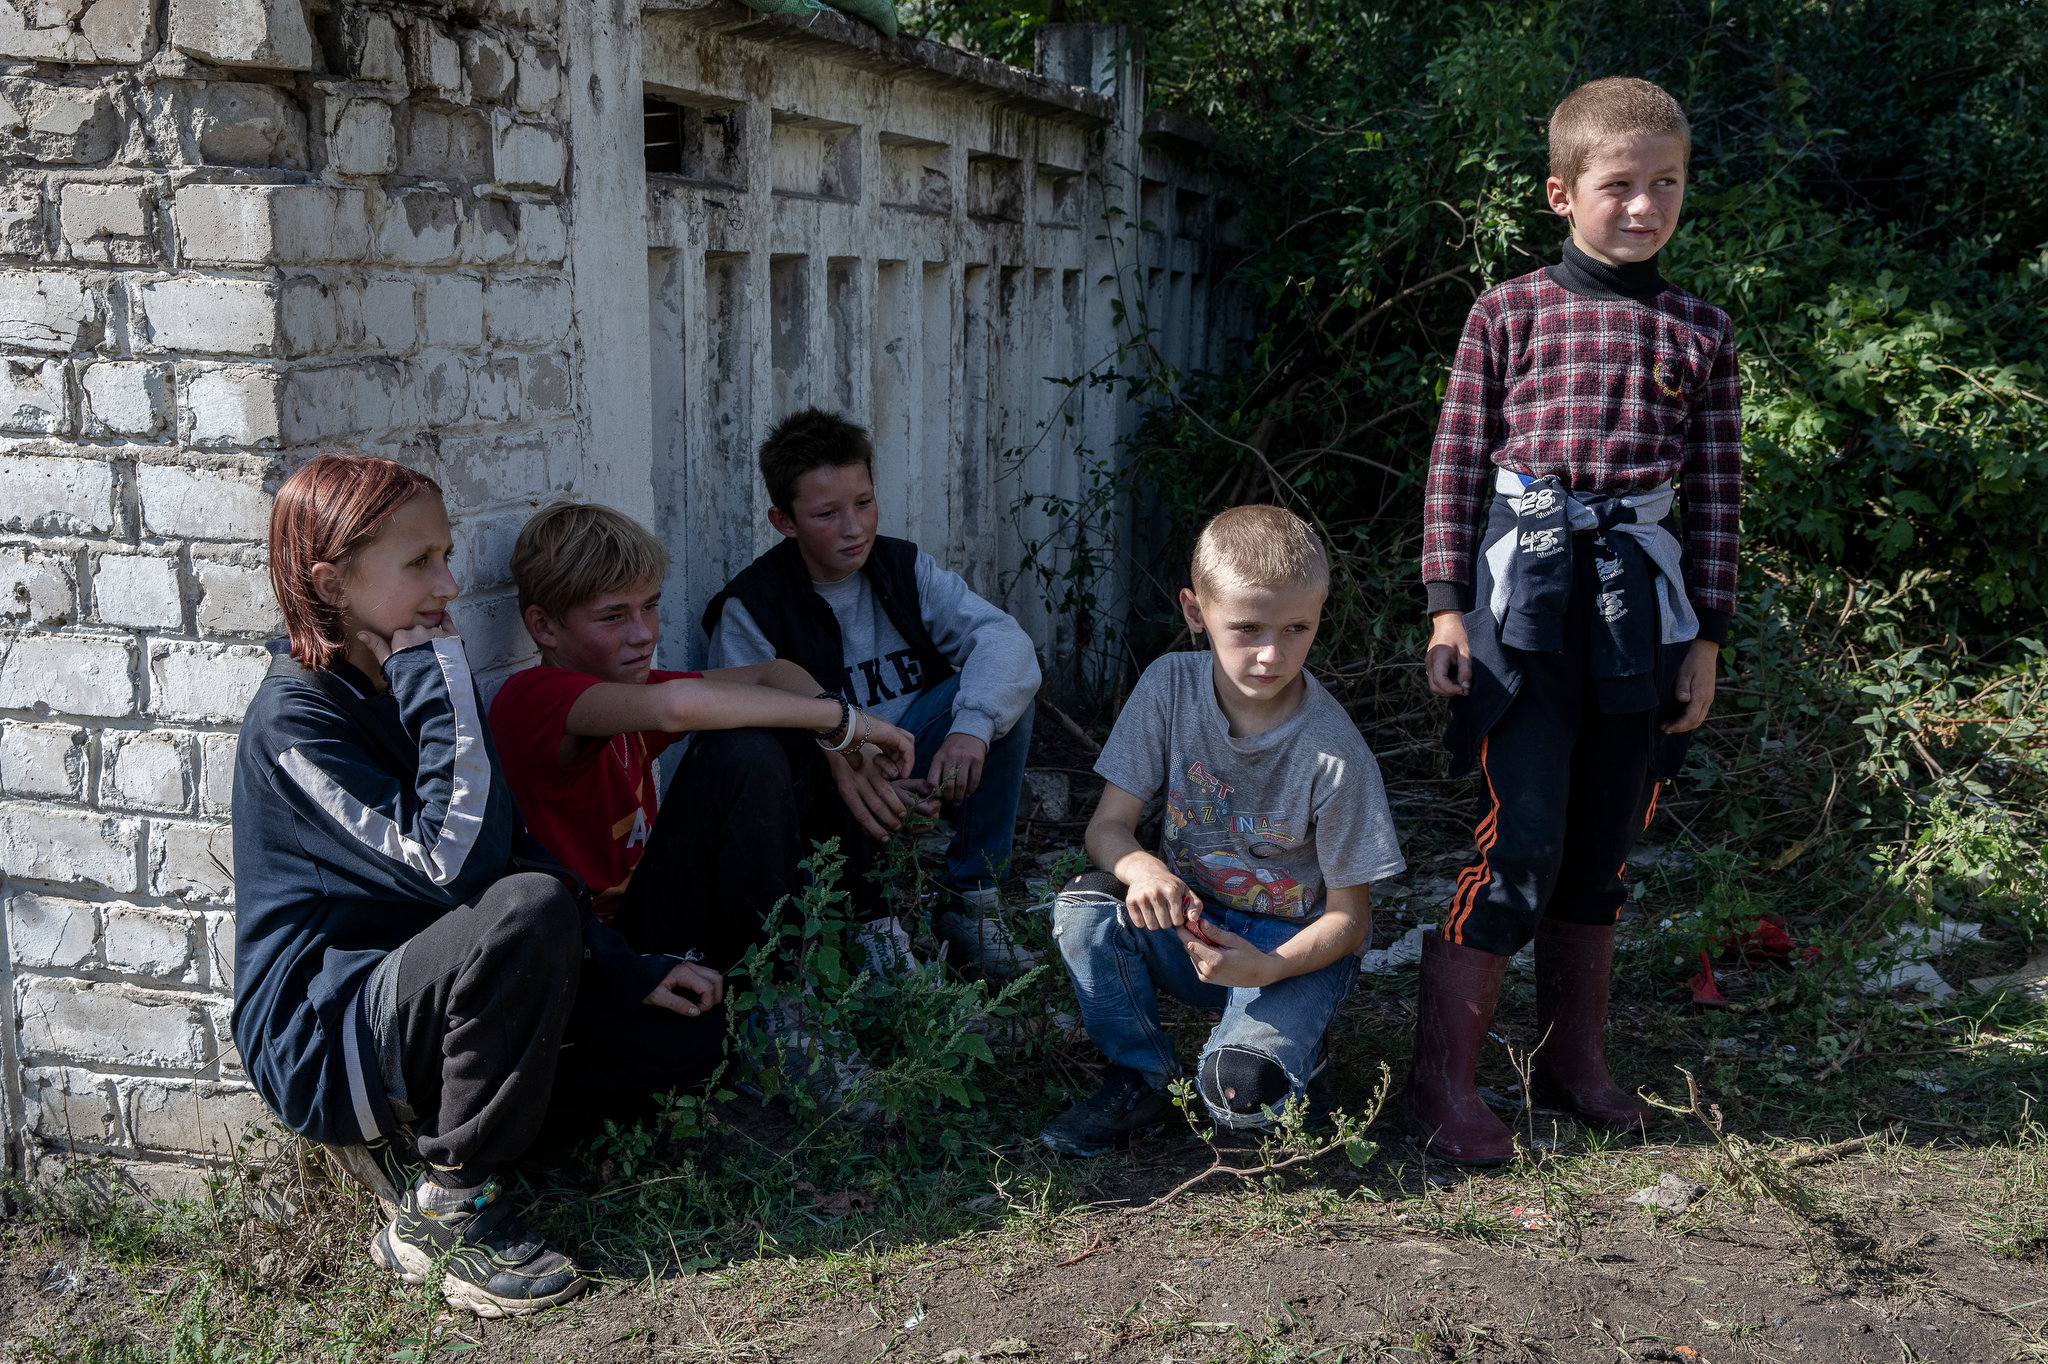 Kids play by the side of the street, in recently liberated Izyum, Ukraine, on September 18, 2022. CREDIT: Adrienne Surprenant / MYOP for The Wall Street Journal KHARKIV